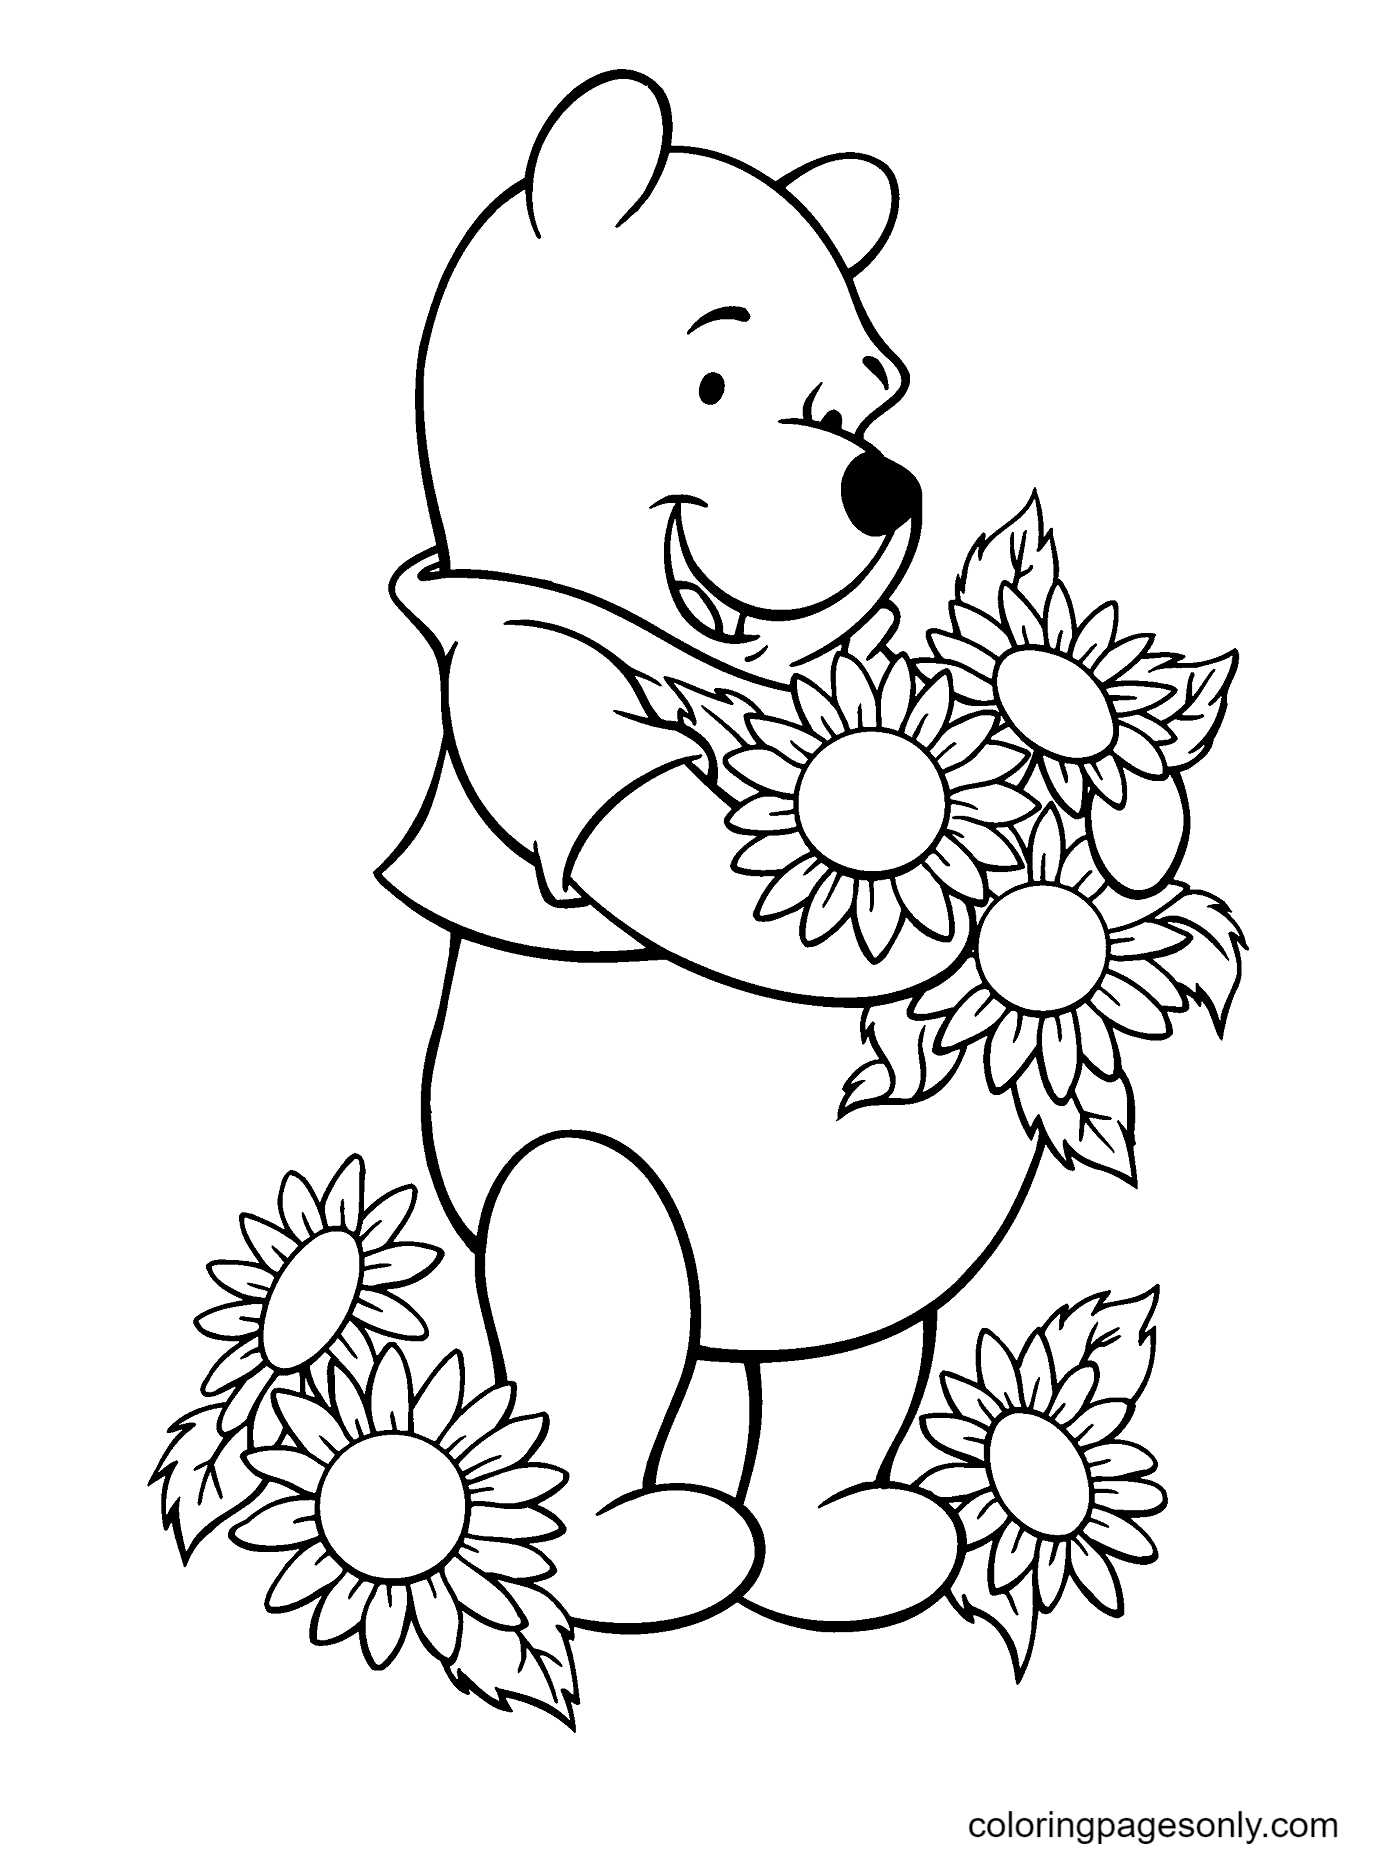 Pooh Loves Flowers Coloring Page